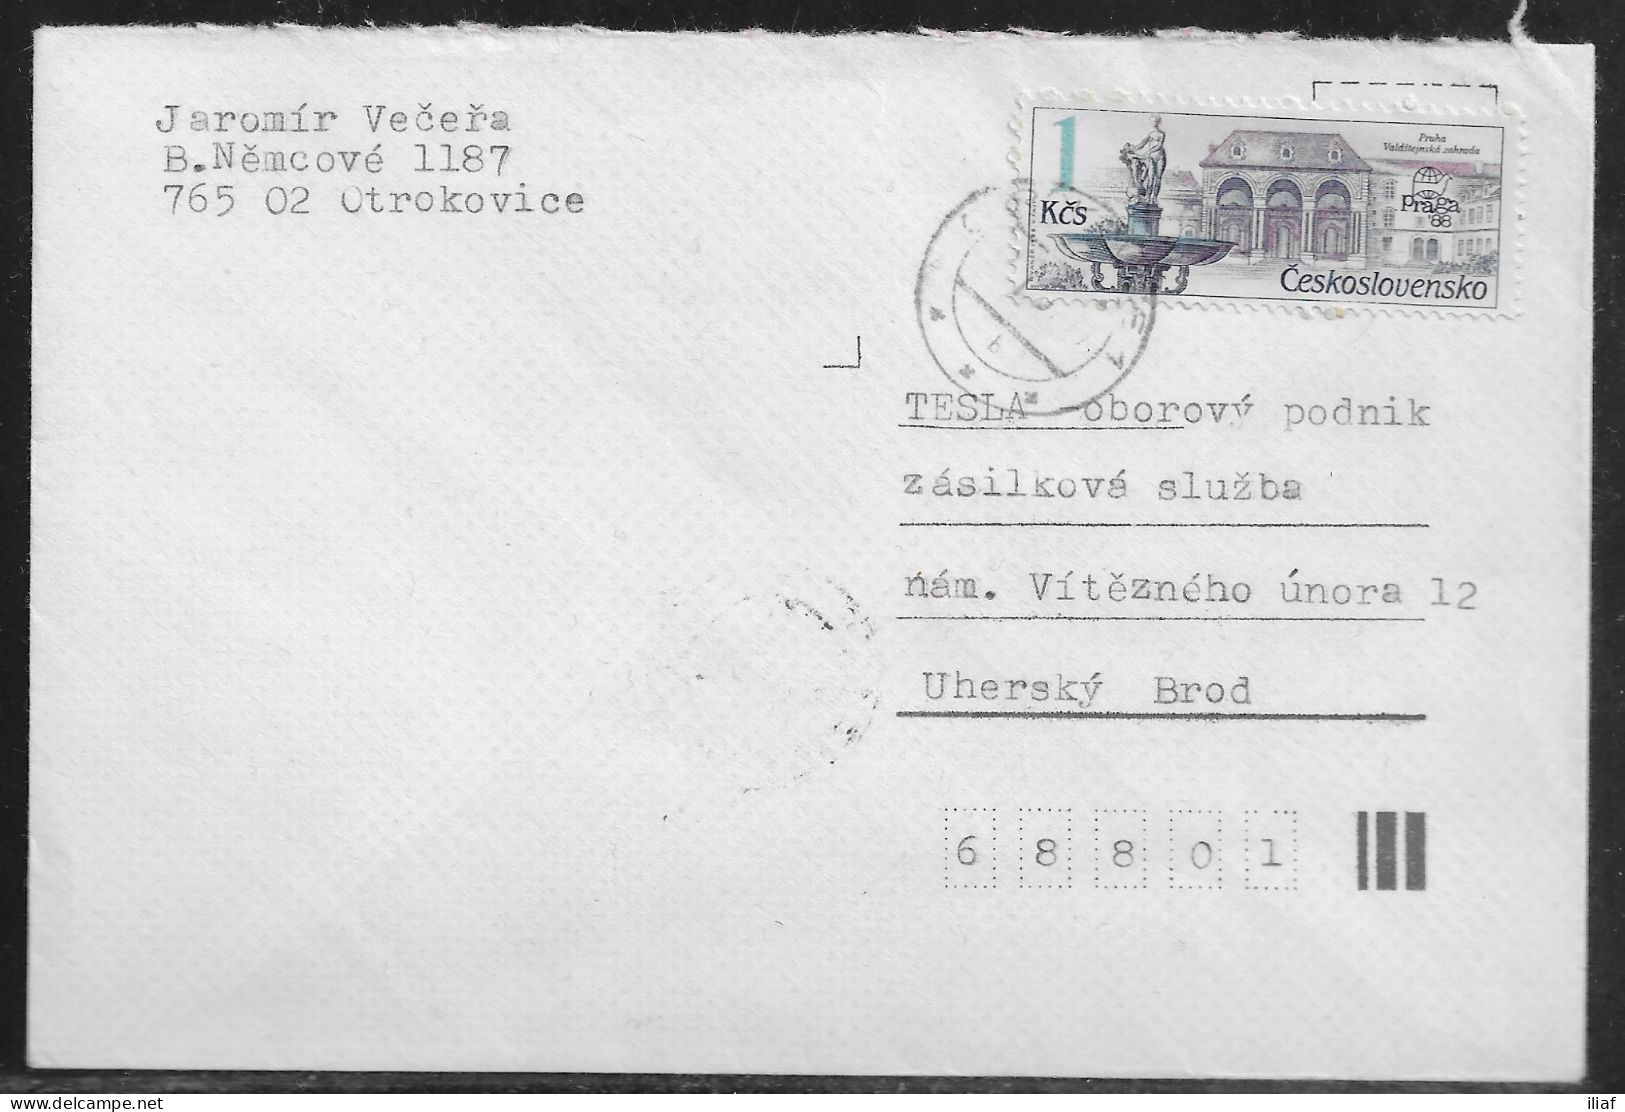 Czechoslovakia. Stamp Sc. 2705 On Letter, Sent From Otrokovice On 16.01.89 For “Tesla” Uhersky Brod. - Covers & Documents